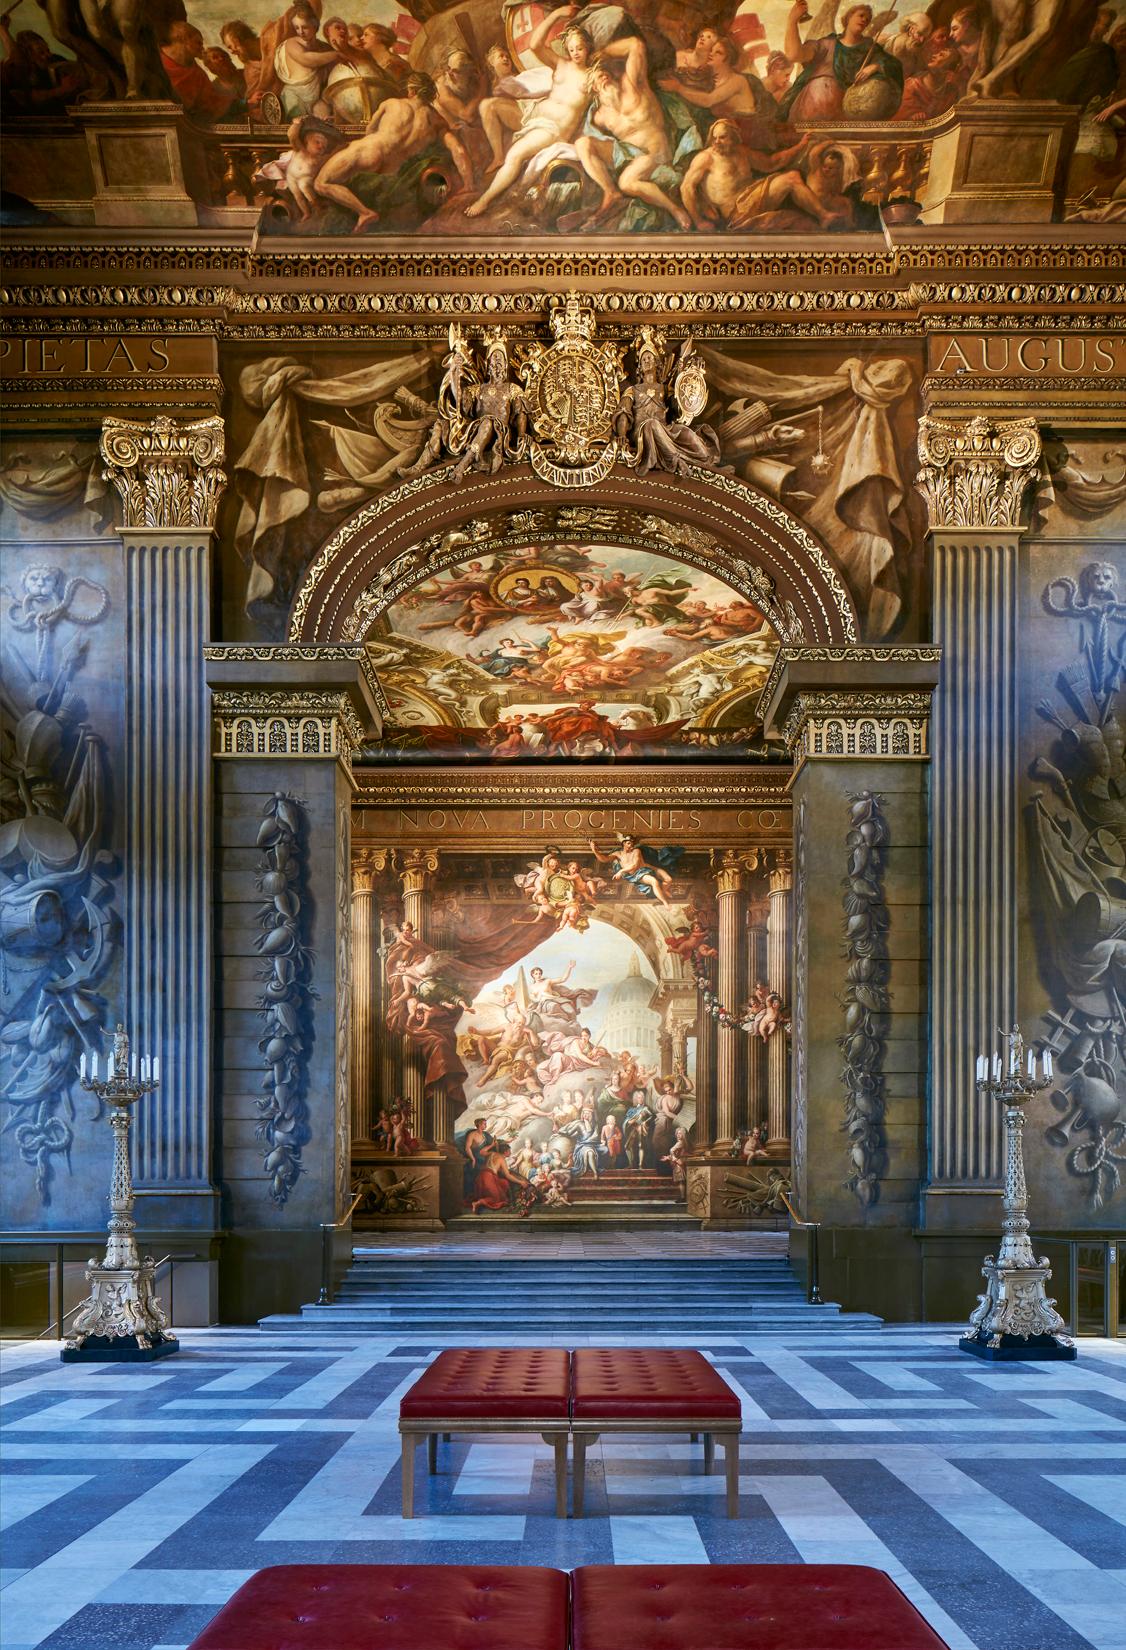 The proscenium arch connects the lower and upper Painted Hall. On the arch’s ceiling are the allegorical signs of the zodiac representing the constellations the seamen navigated by. (Old Royal Naval College)